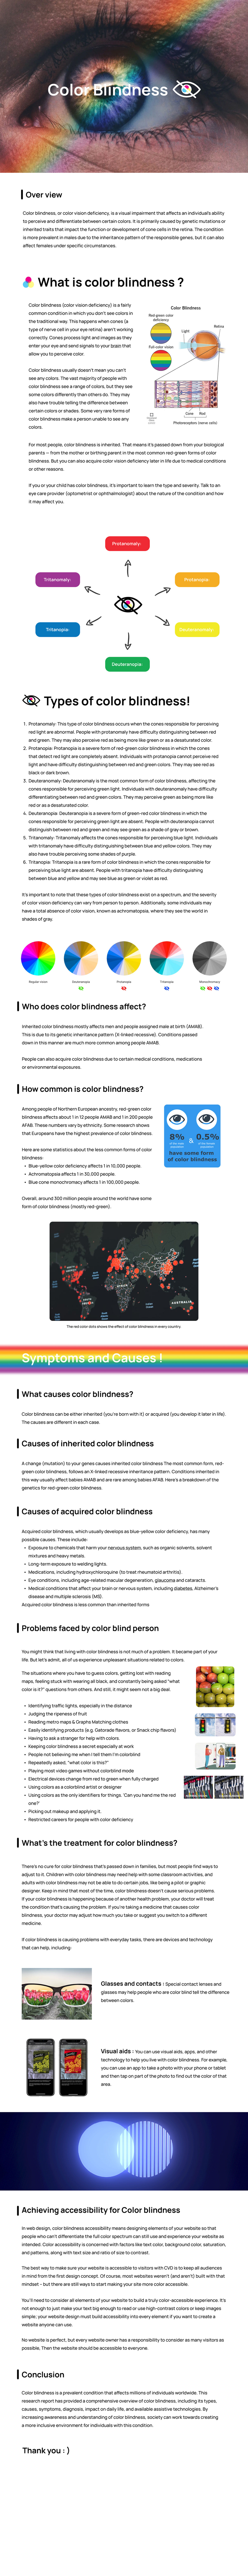 Research Report colorblind Accessibility accessible design UI/UX UX design Figma colorblindess